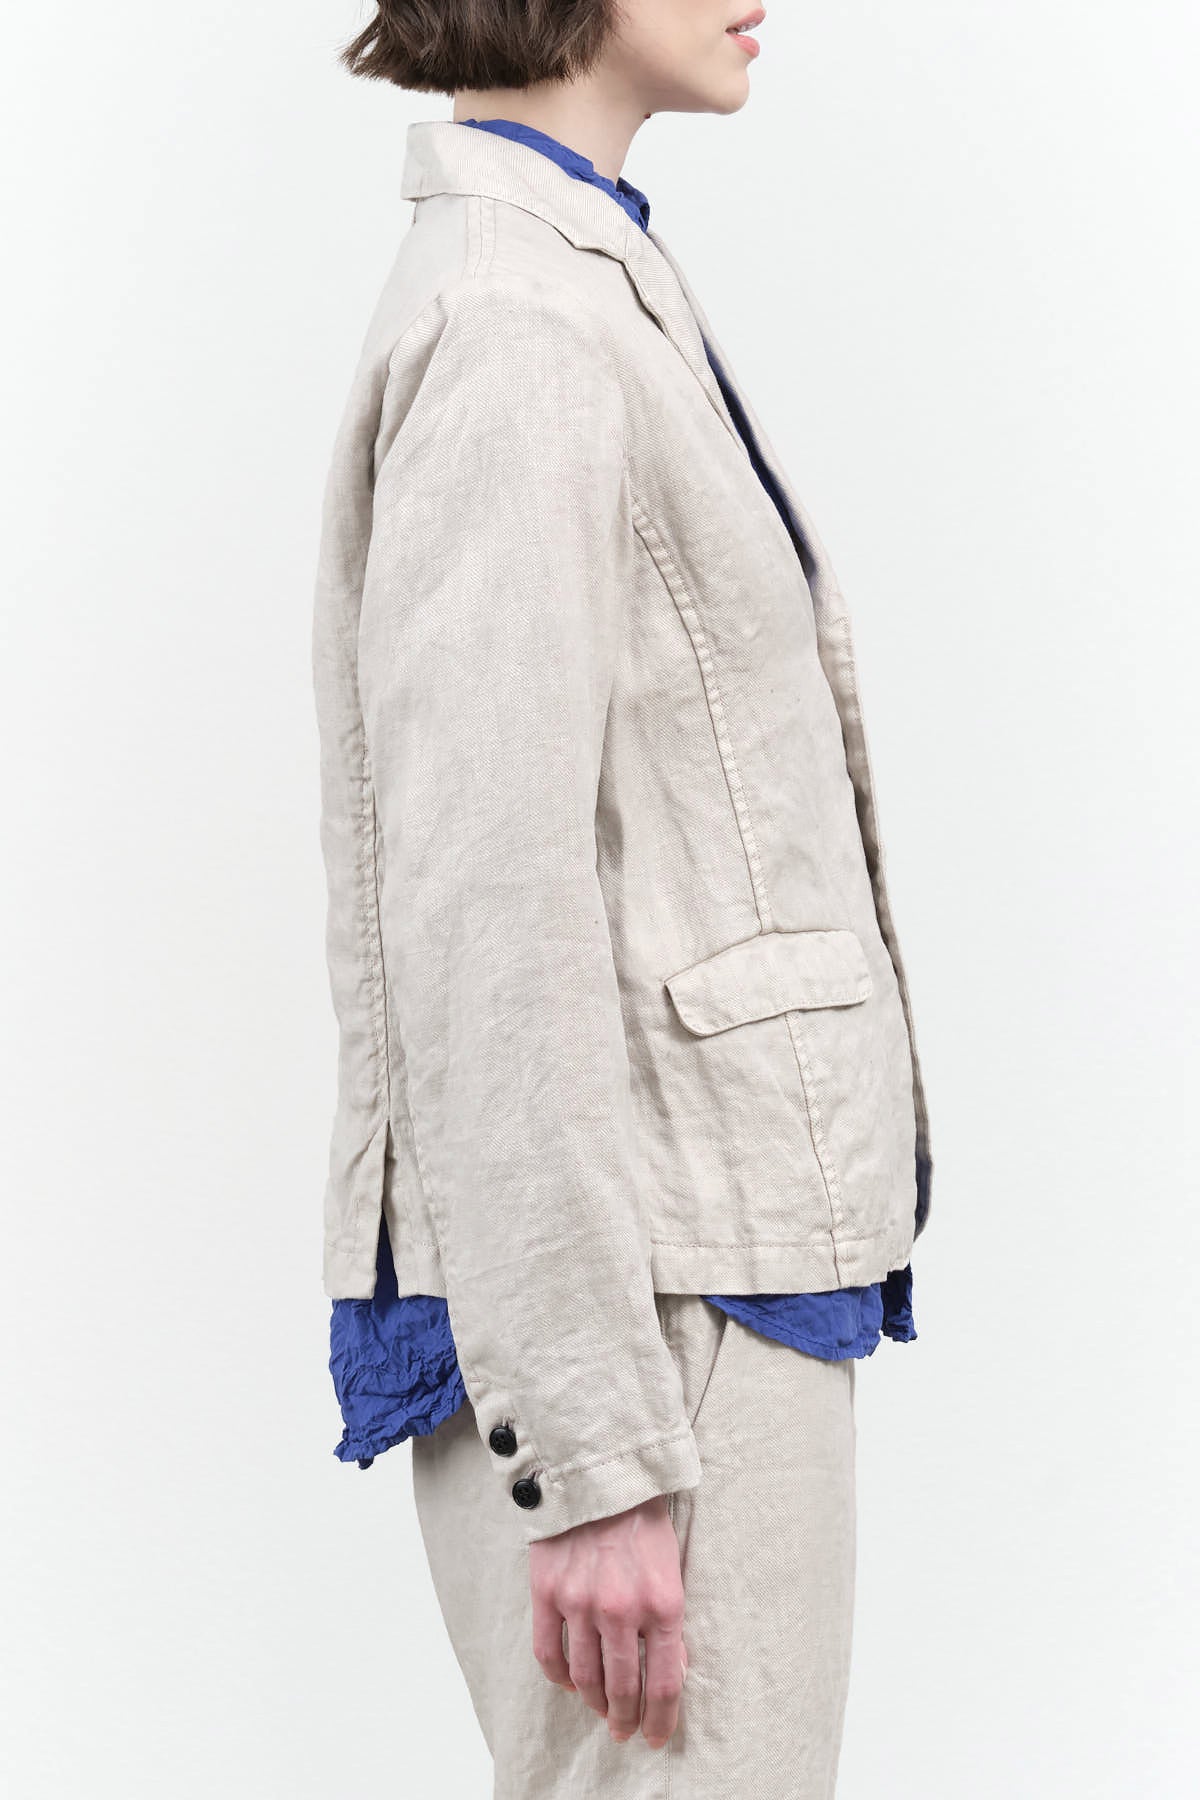 Side view of Classic Linen Jacket